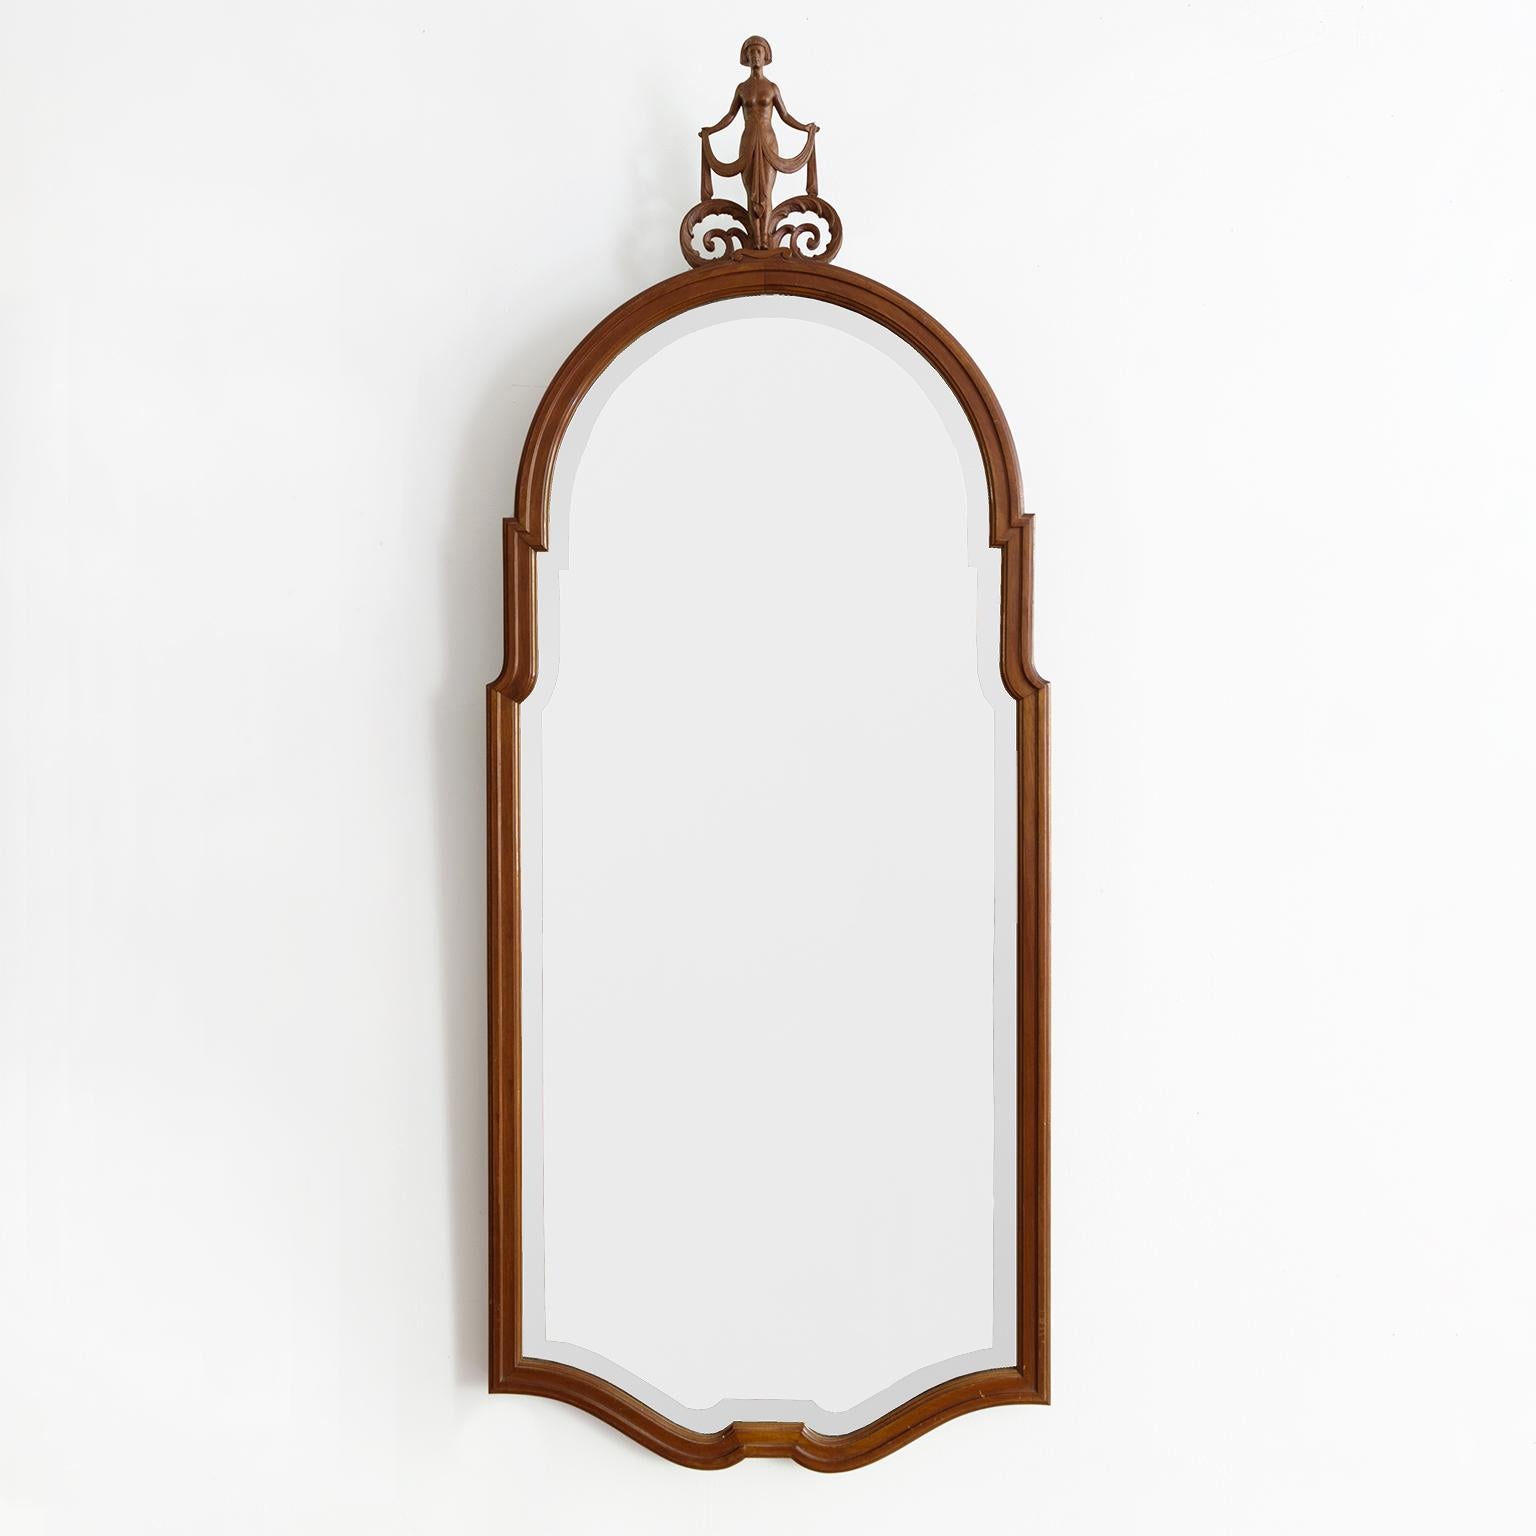 Swedish Grace mirror with carved mahogany frame topped with a female figure dressed in the Egyptian style. Fine quality, design and maker currently unknown. Created circa 1920-30.

Measures: Height: 60”, width: 19.75”. depth: 1.5.